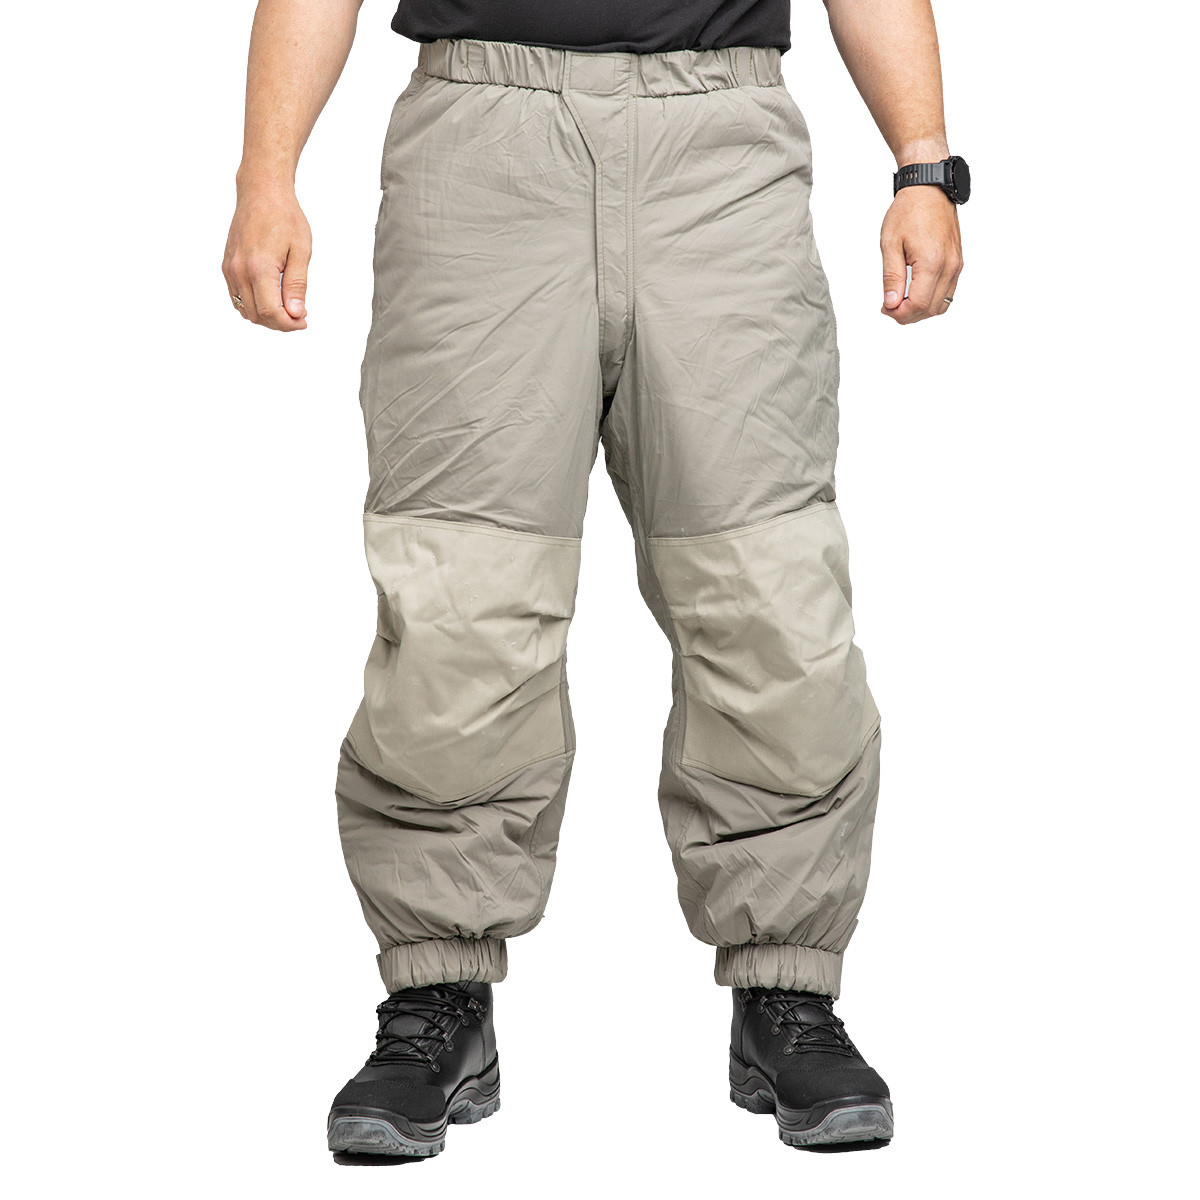 Primaloft Extreme ECW Gen 3 III Level 7 Cold Weather Insulated Pants Trousers 